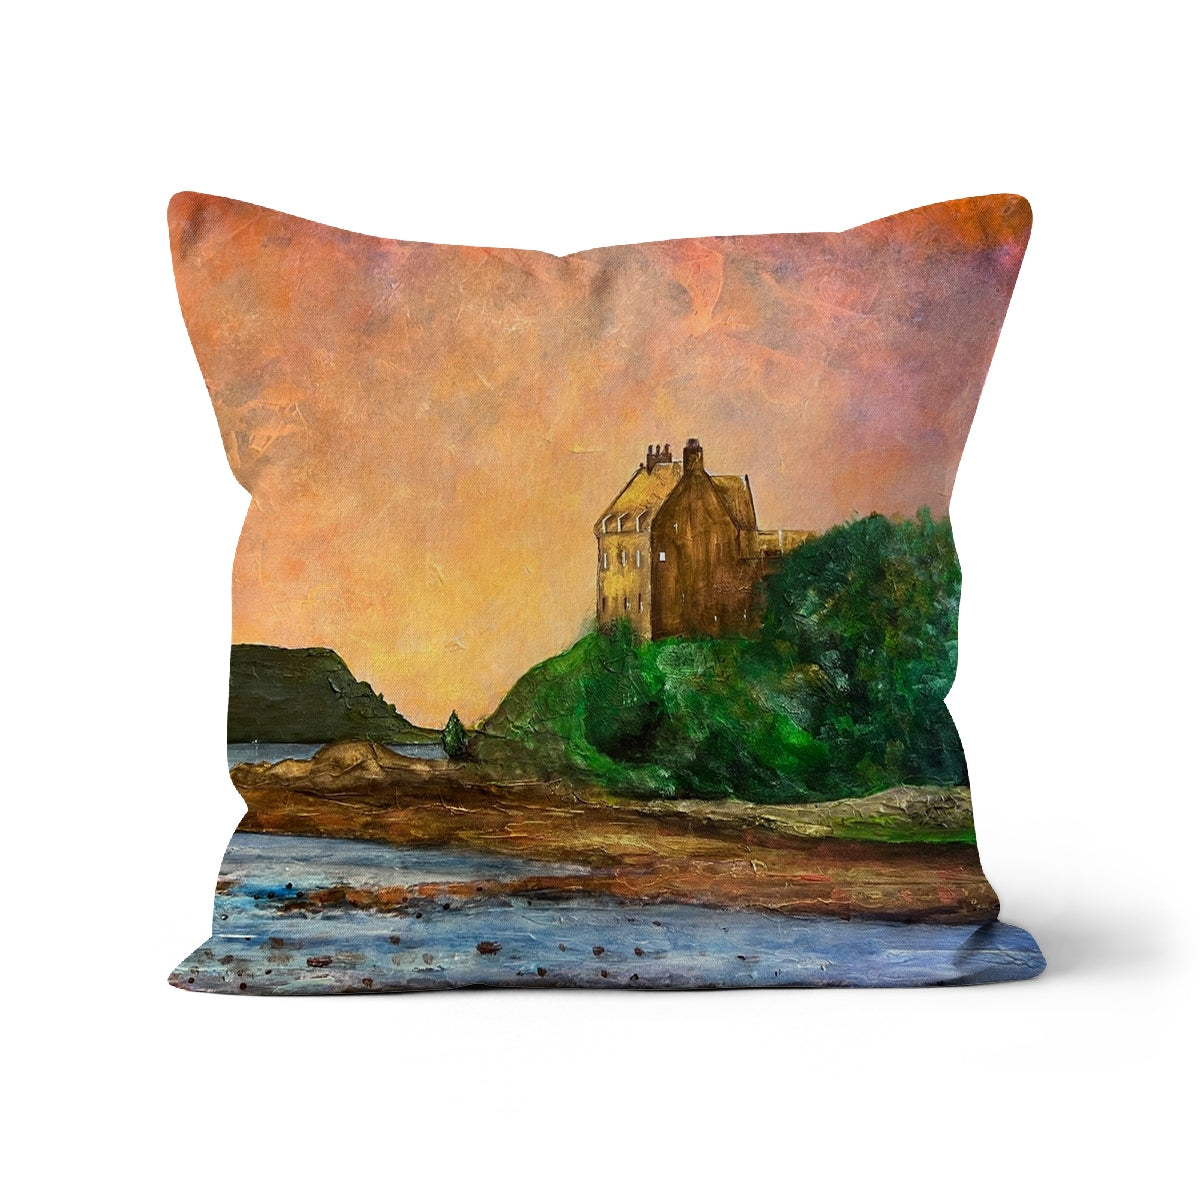 Duntrune Castle Art Gifts Cushion-Cushions-Historic & Iconic Scotland Art Gallery-Canvas-24"x24"-Paintings, Prints, Homeware, Art Gifts From Scotland By Scottish Artist Kevin Hunter